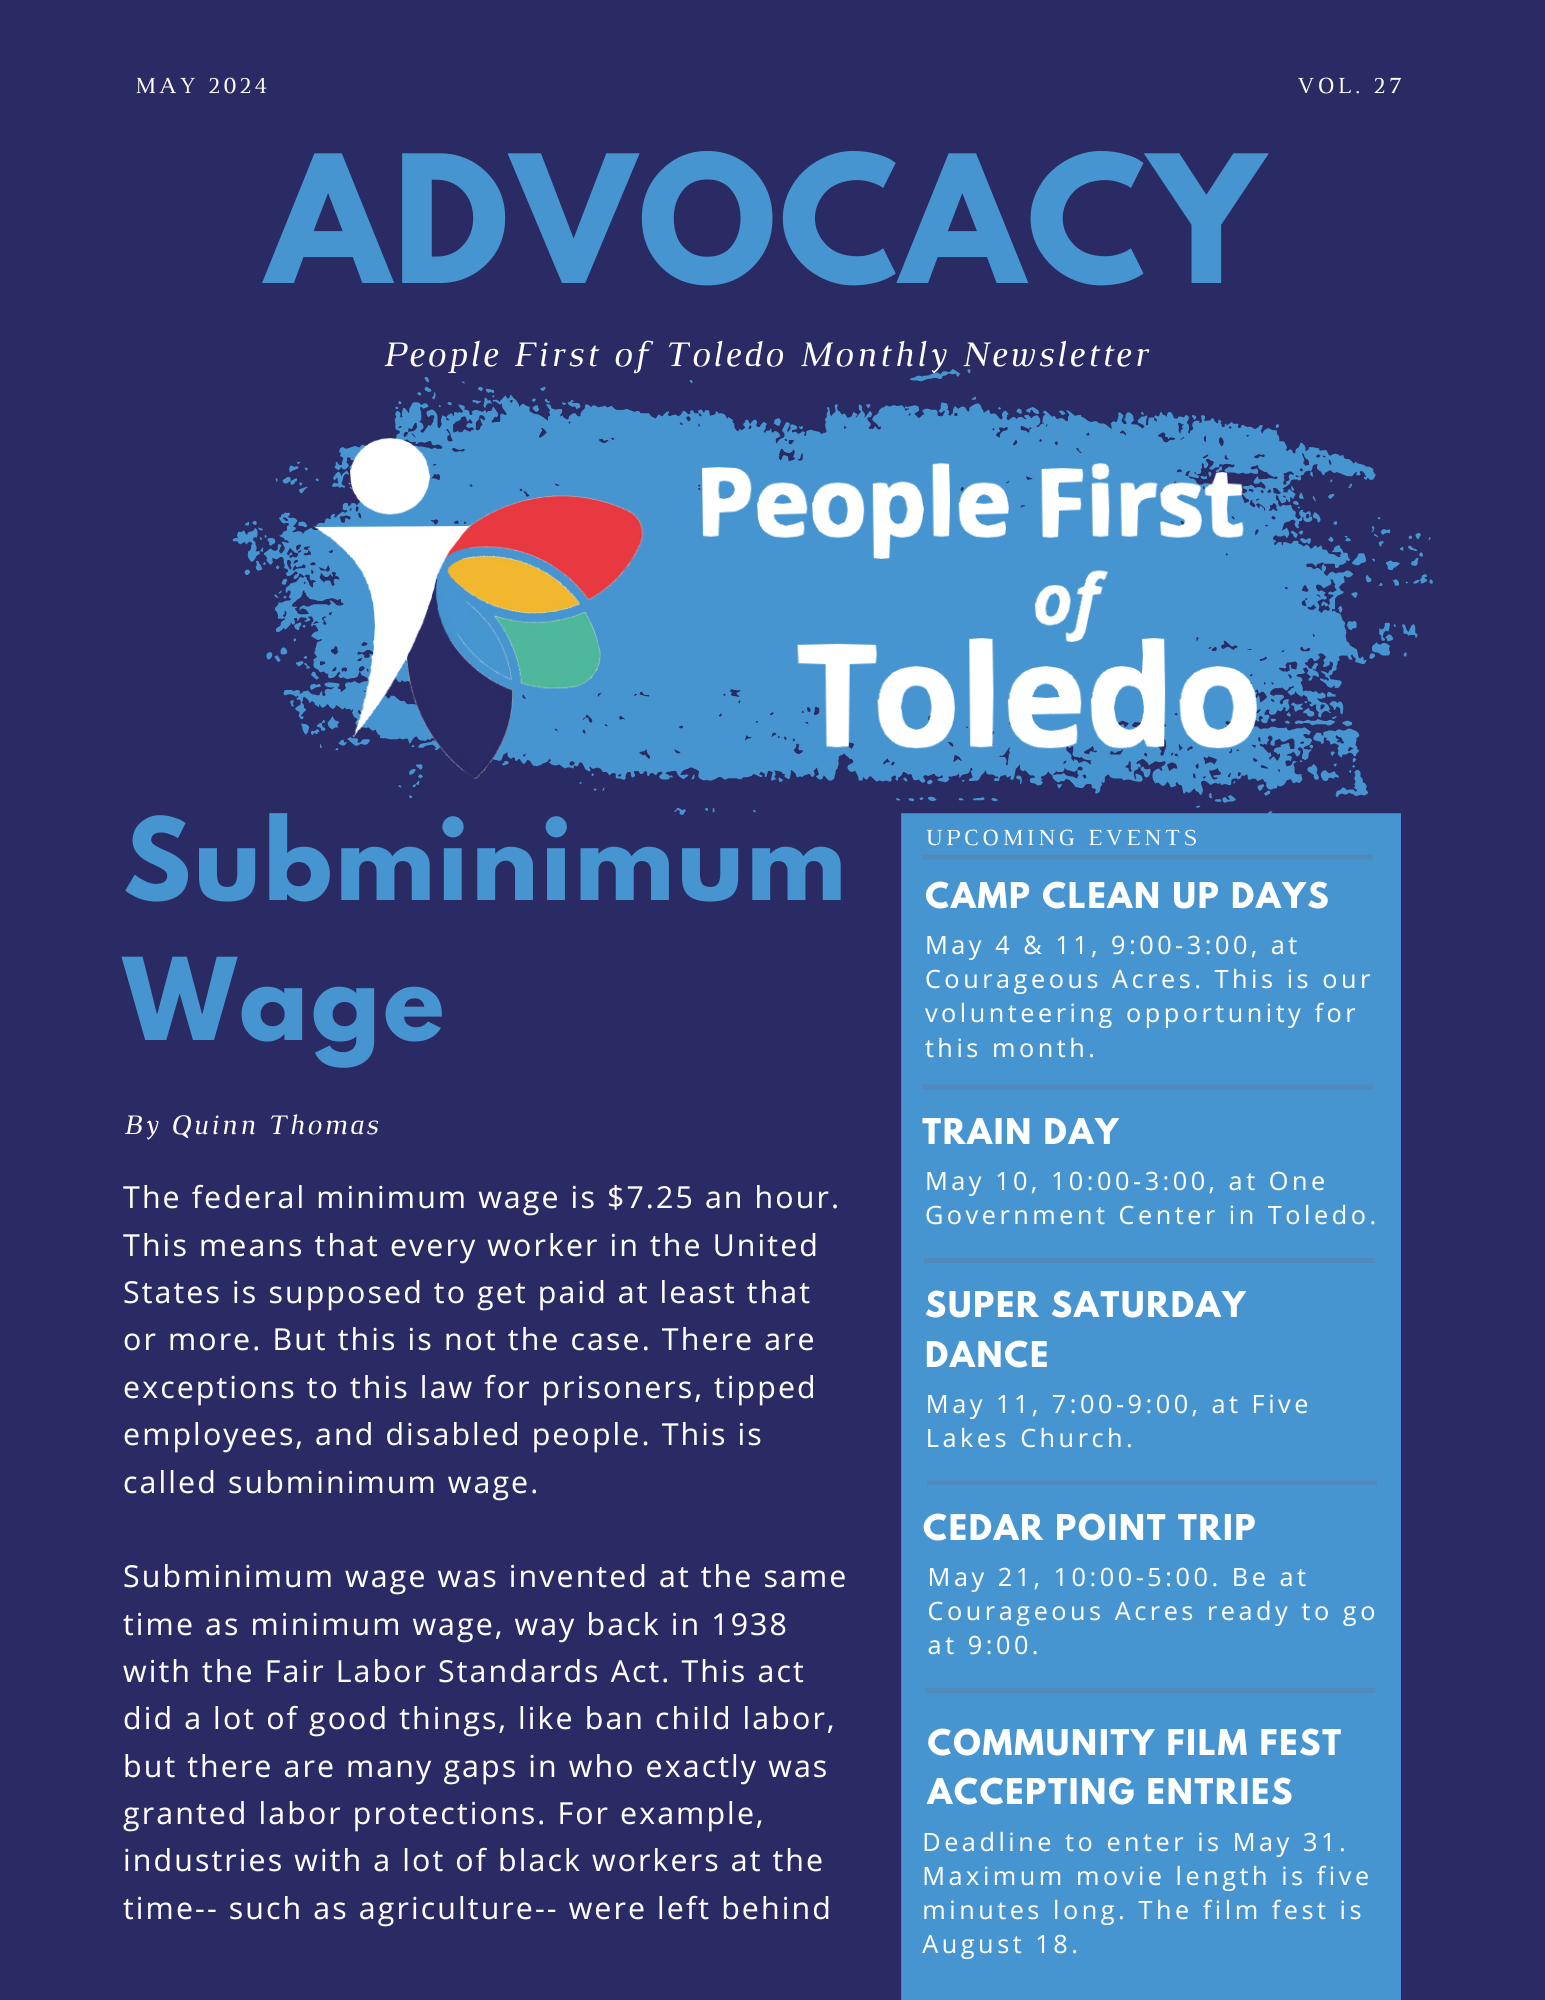 The front page of People First of Toledo's May 2024 newsletter.